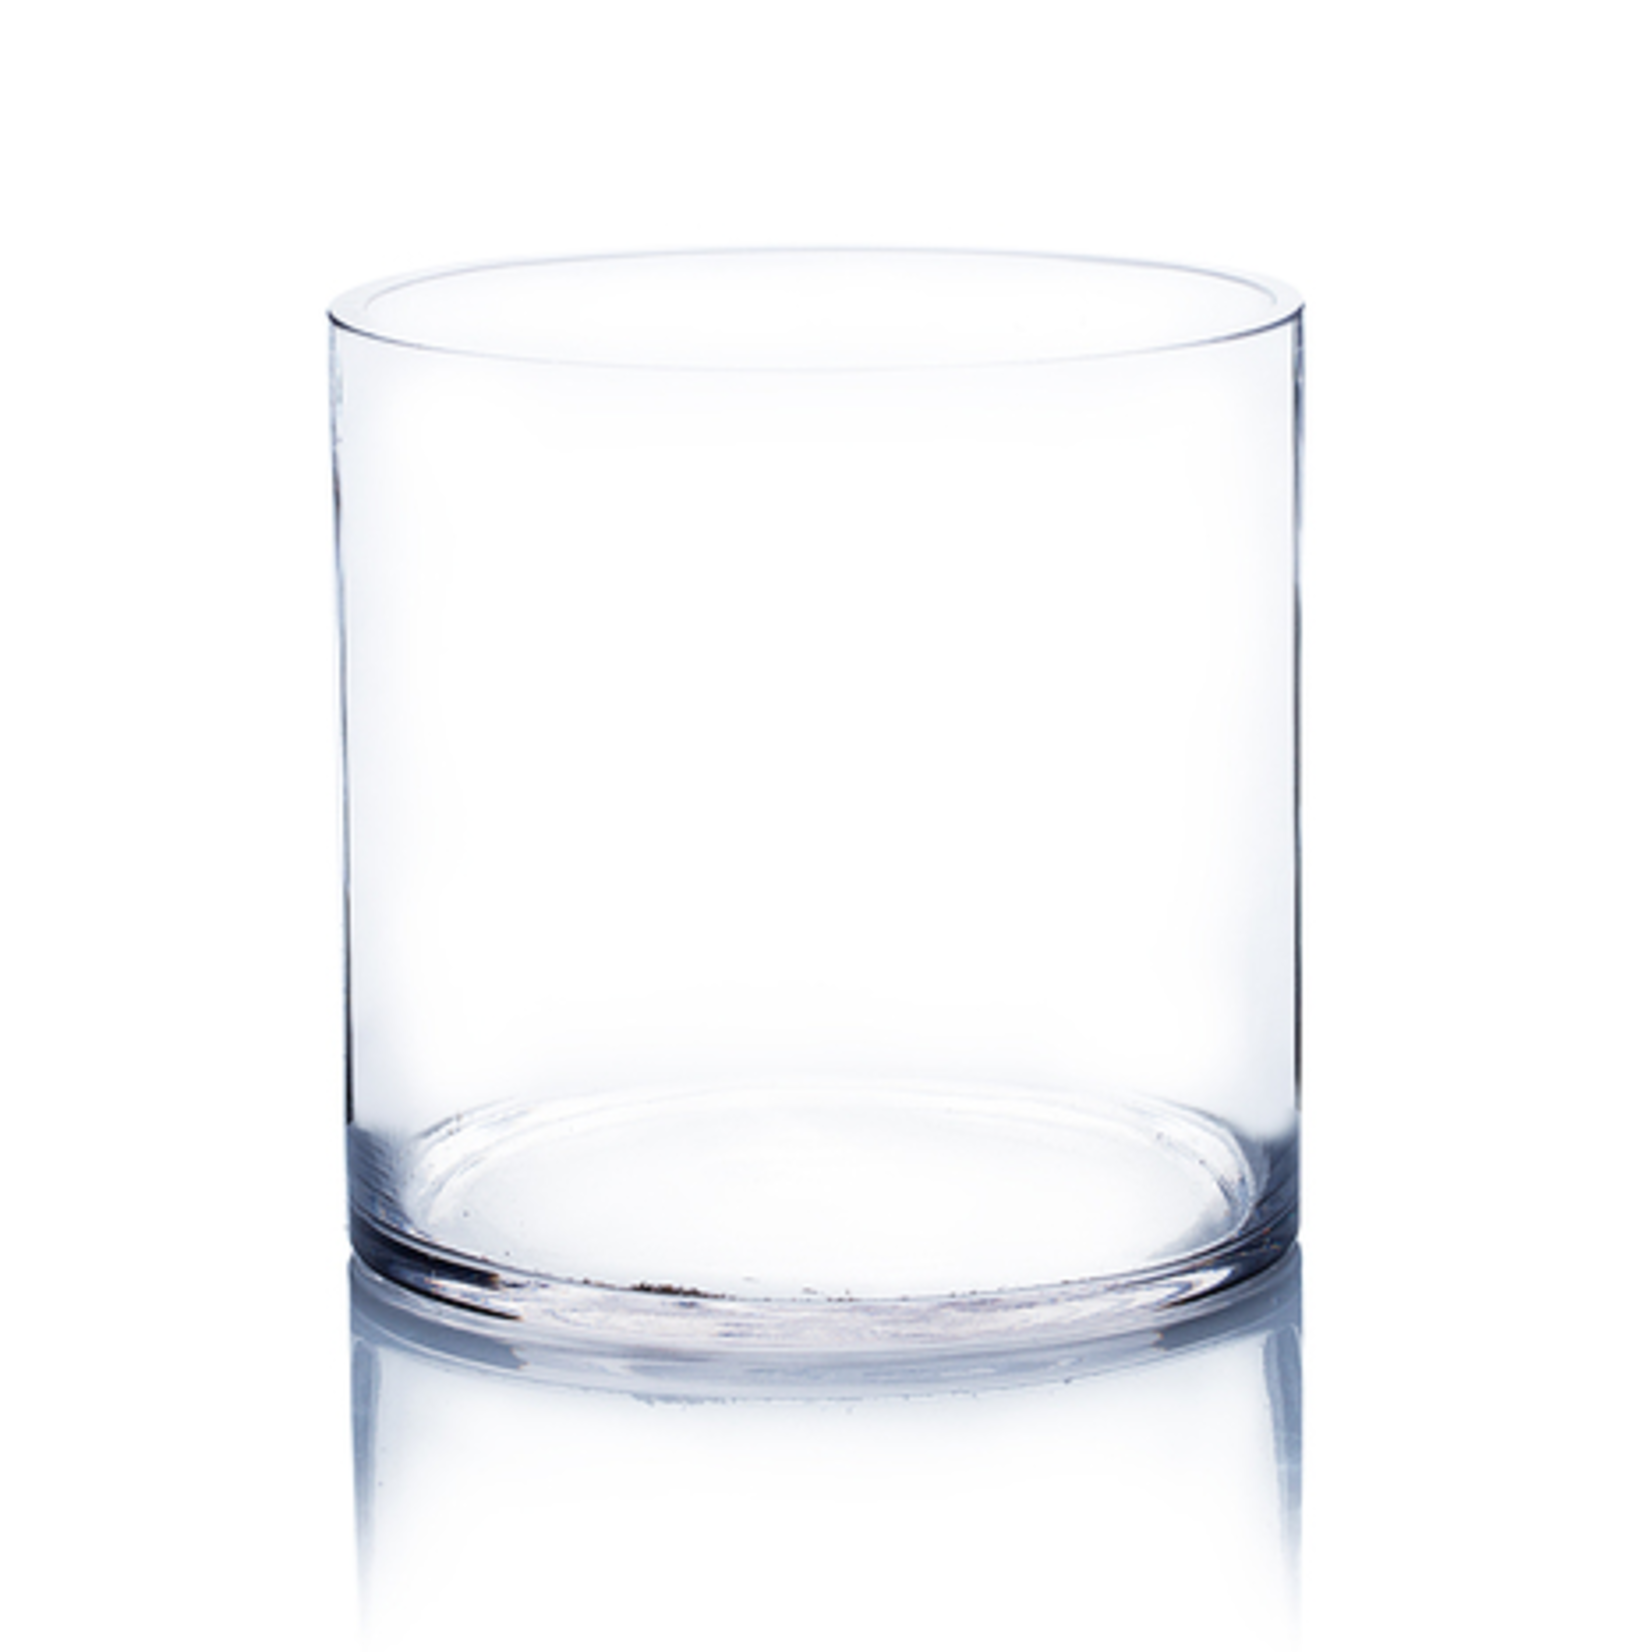 6"h x 6"d CLEAR GLASS CYLINDER